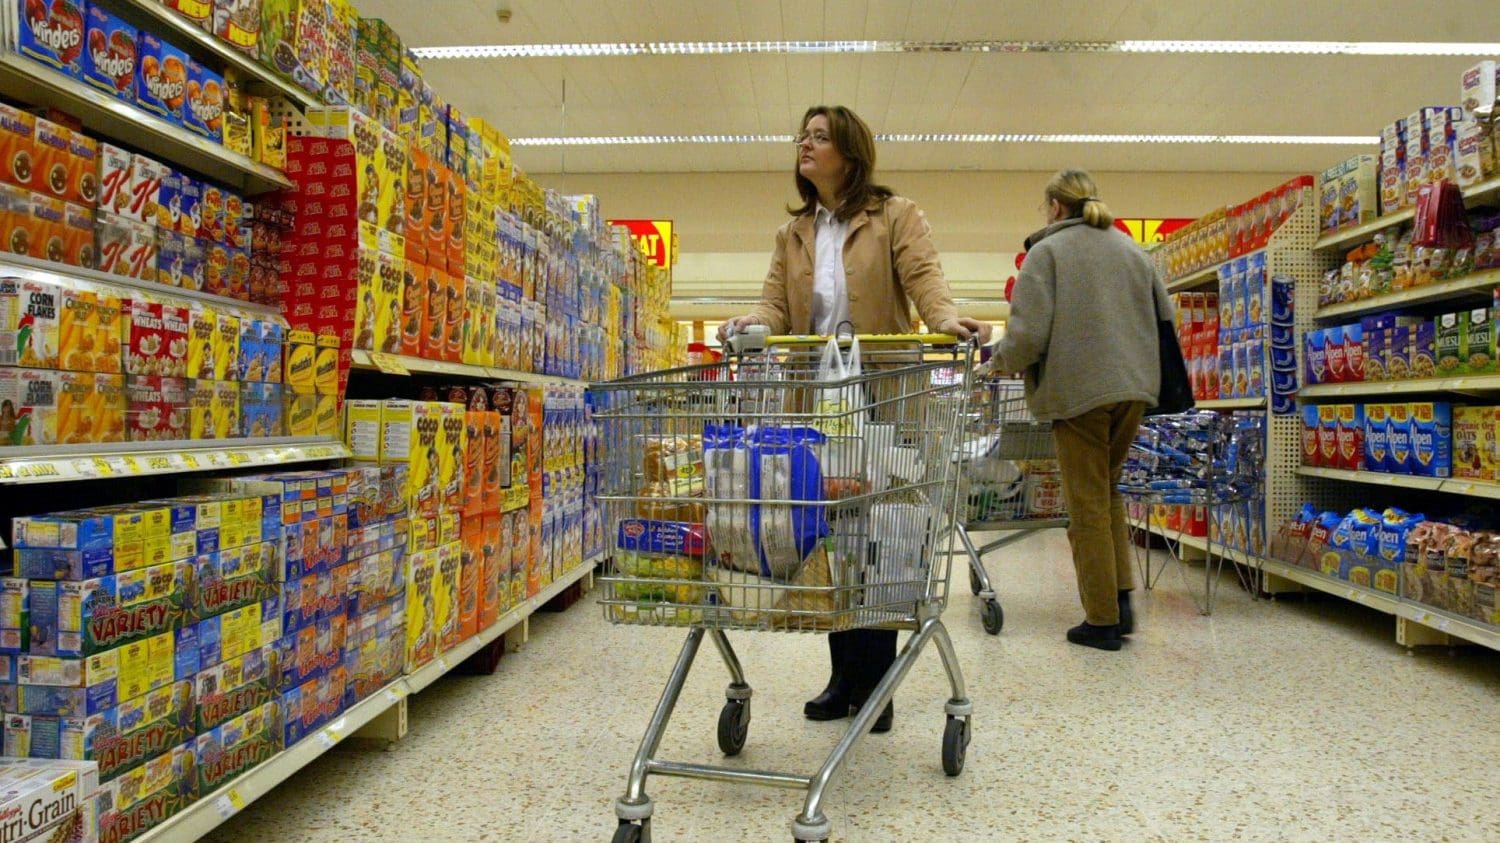 Hundreds of grocery items more than 20% pricier over last two years